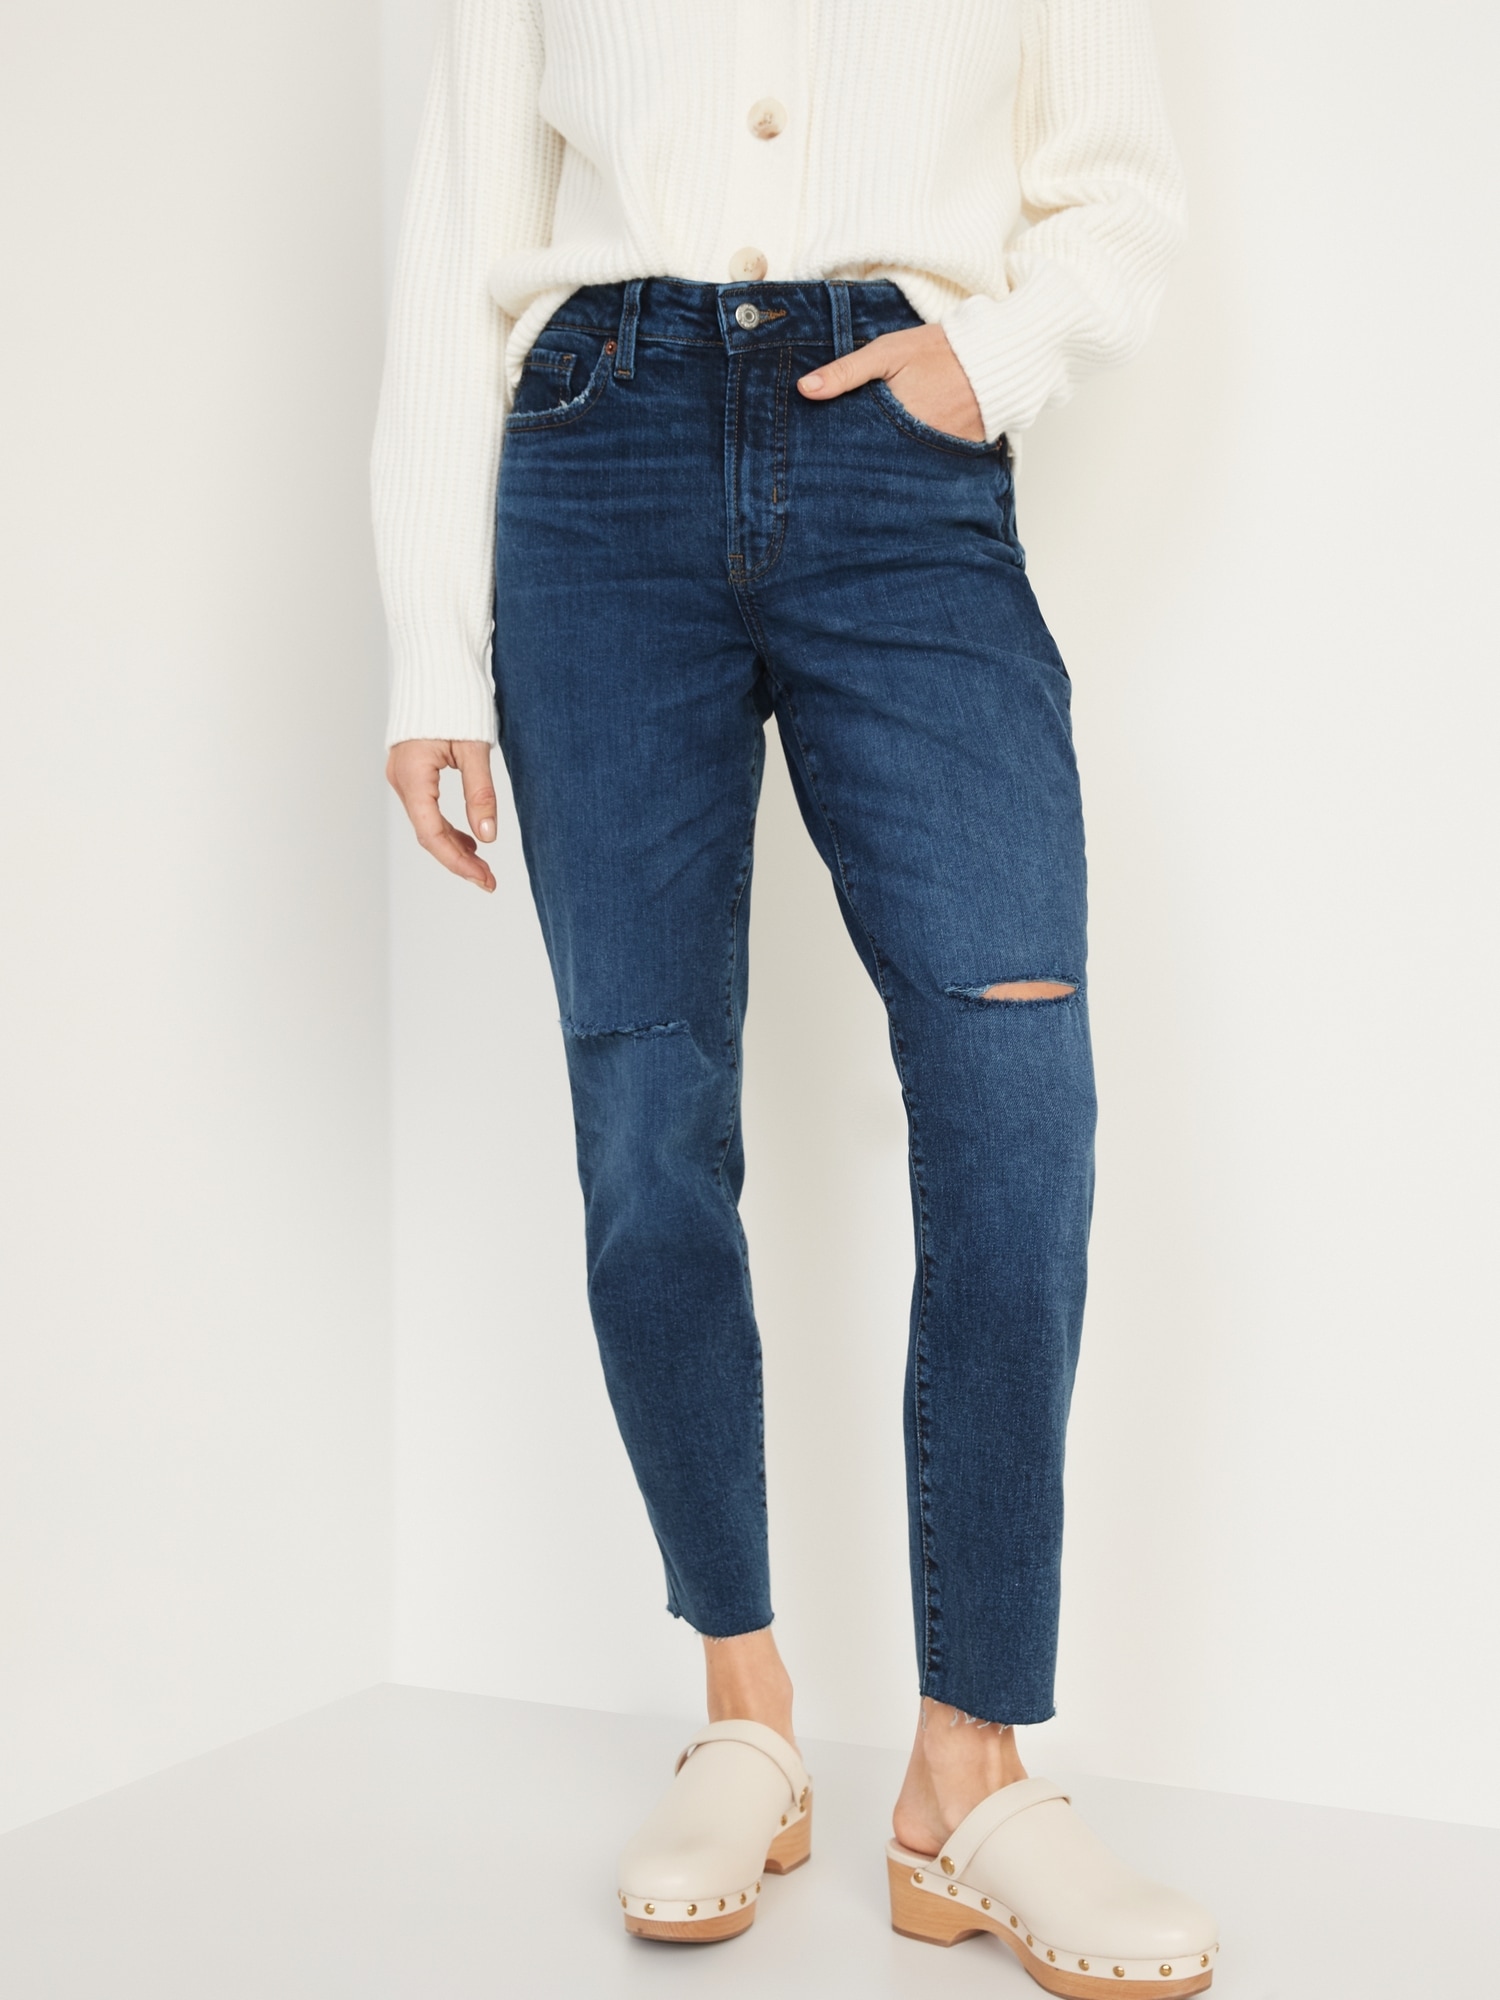 High-Waisted O.G. Straight Ripped Cut-Off Jeans for Women | Old Navy